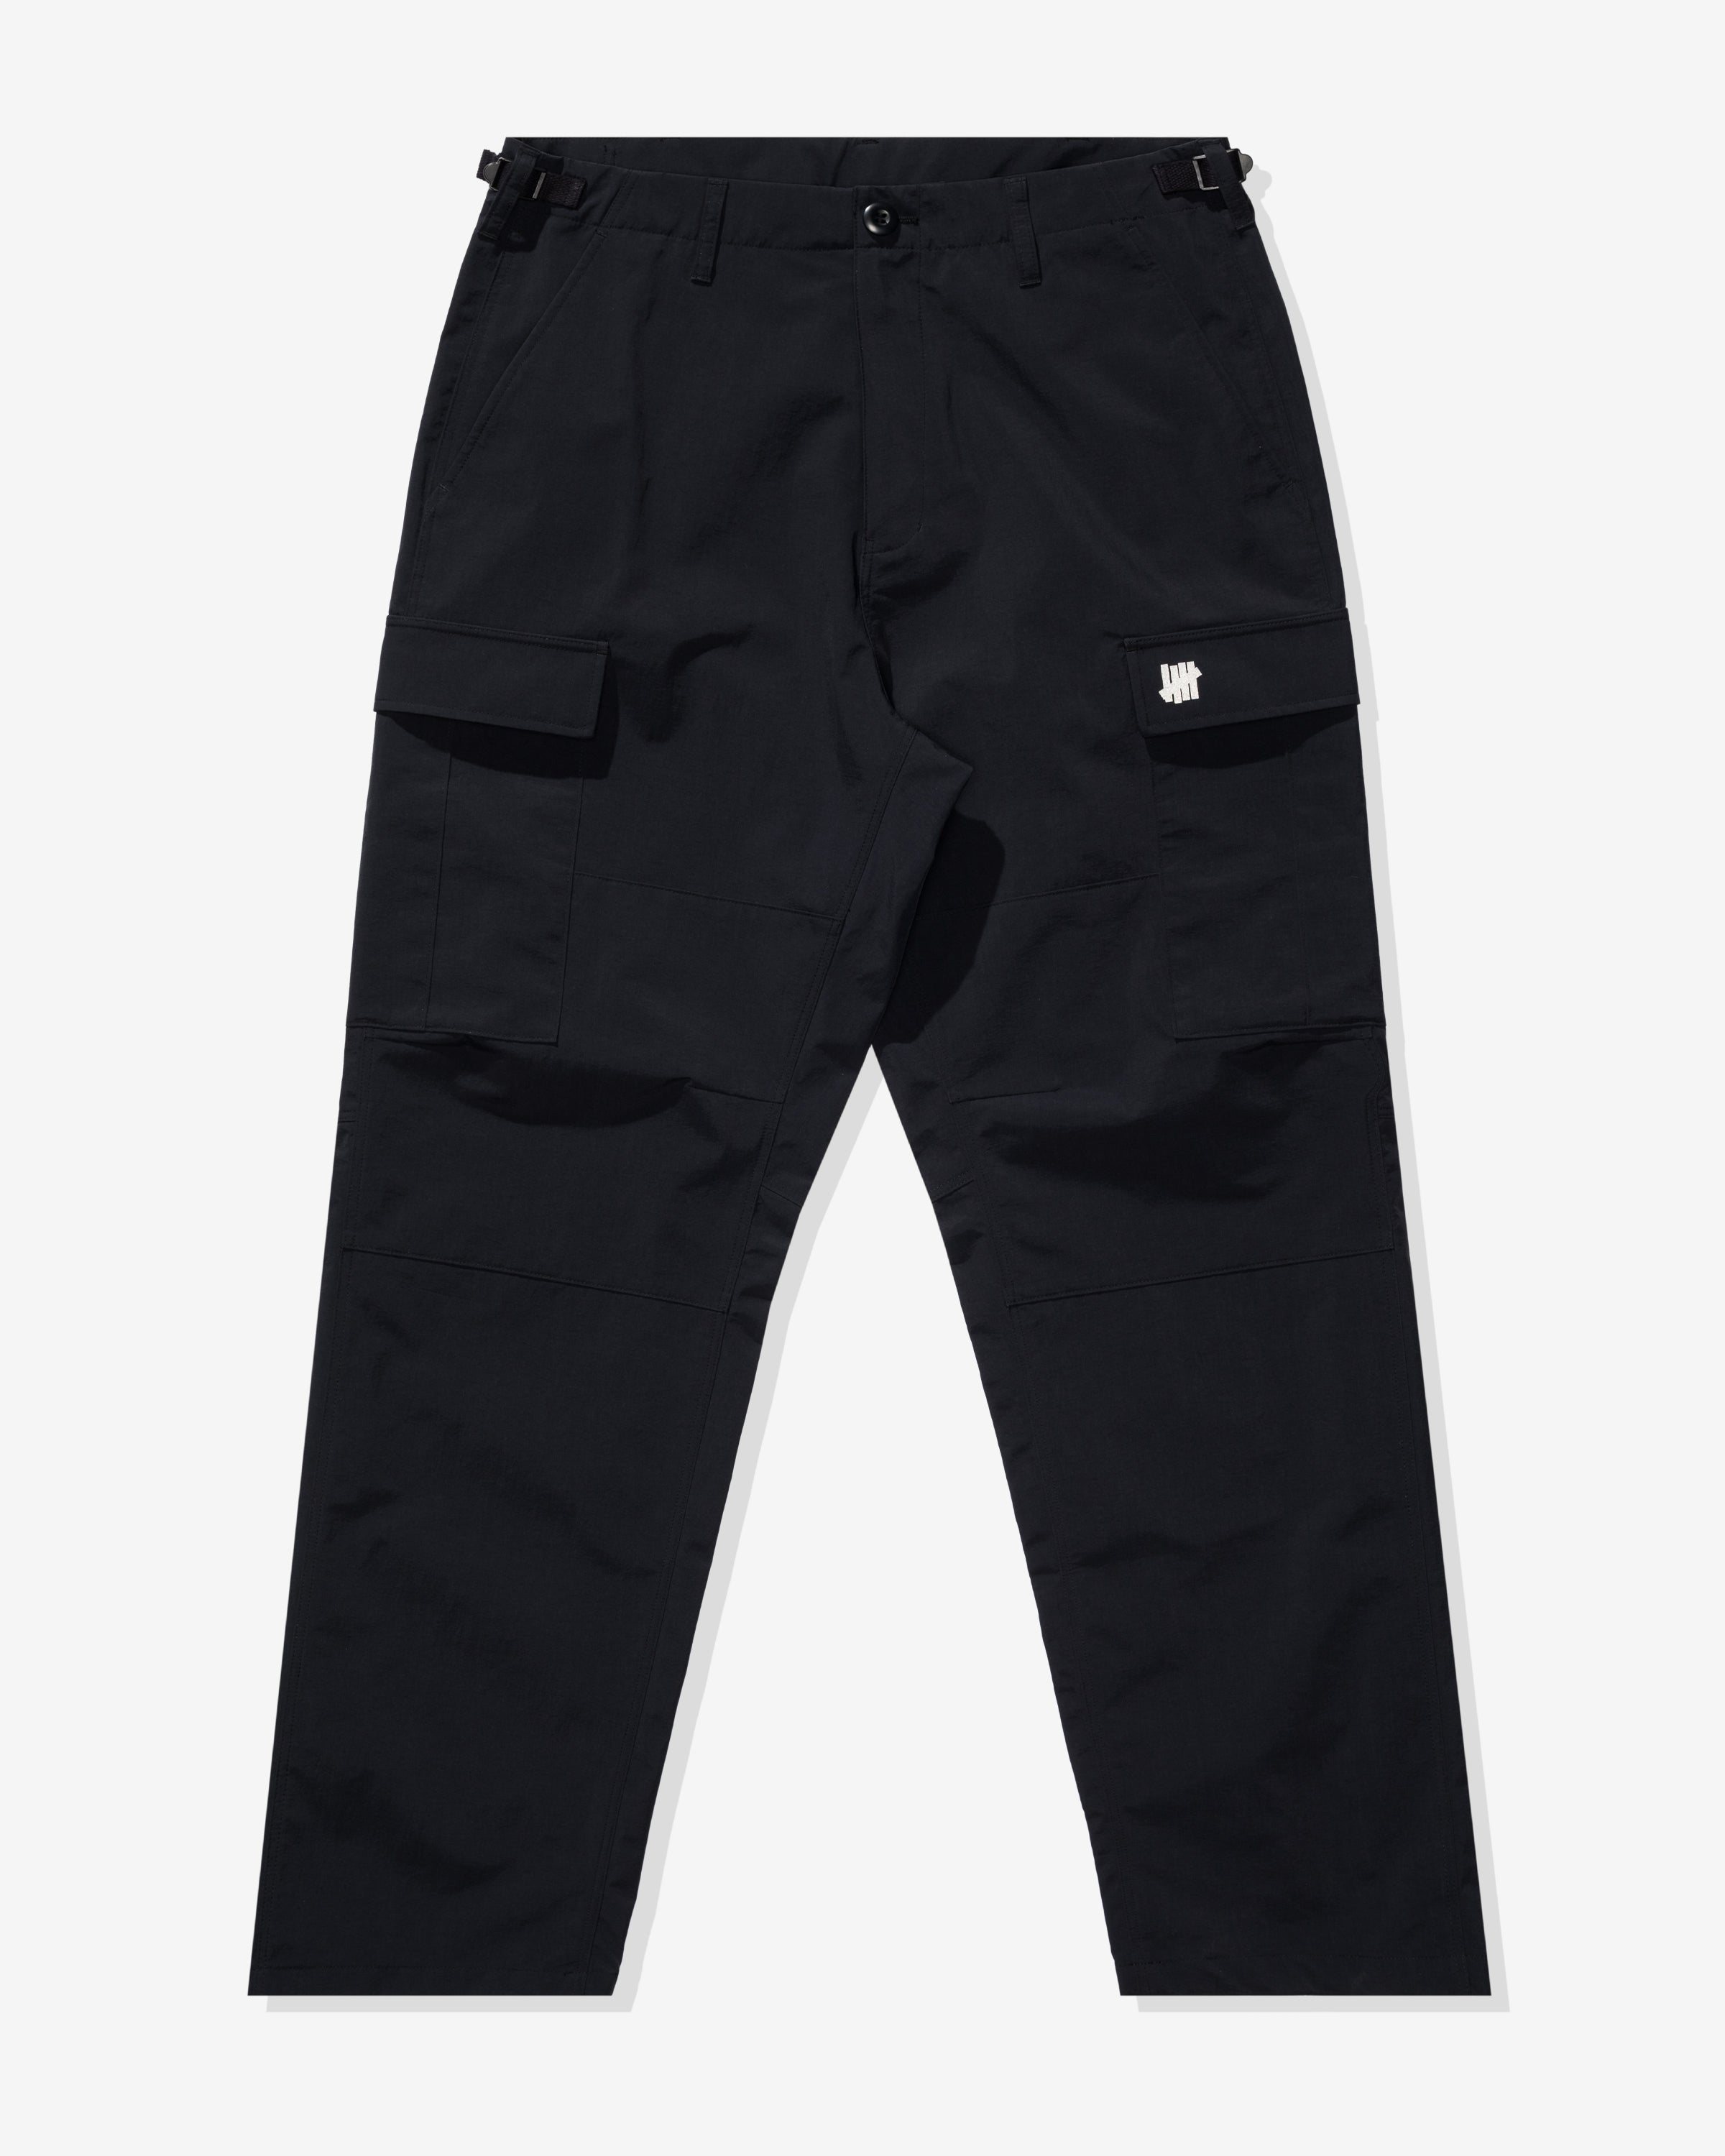 UNDEFEATED TECH CARGO PANT – UNDEFEATED JAPAN